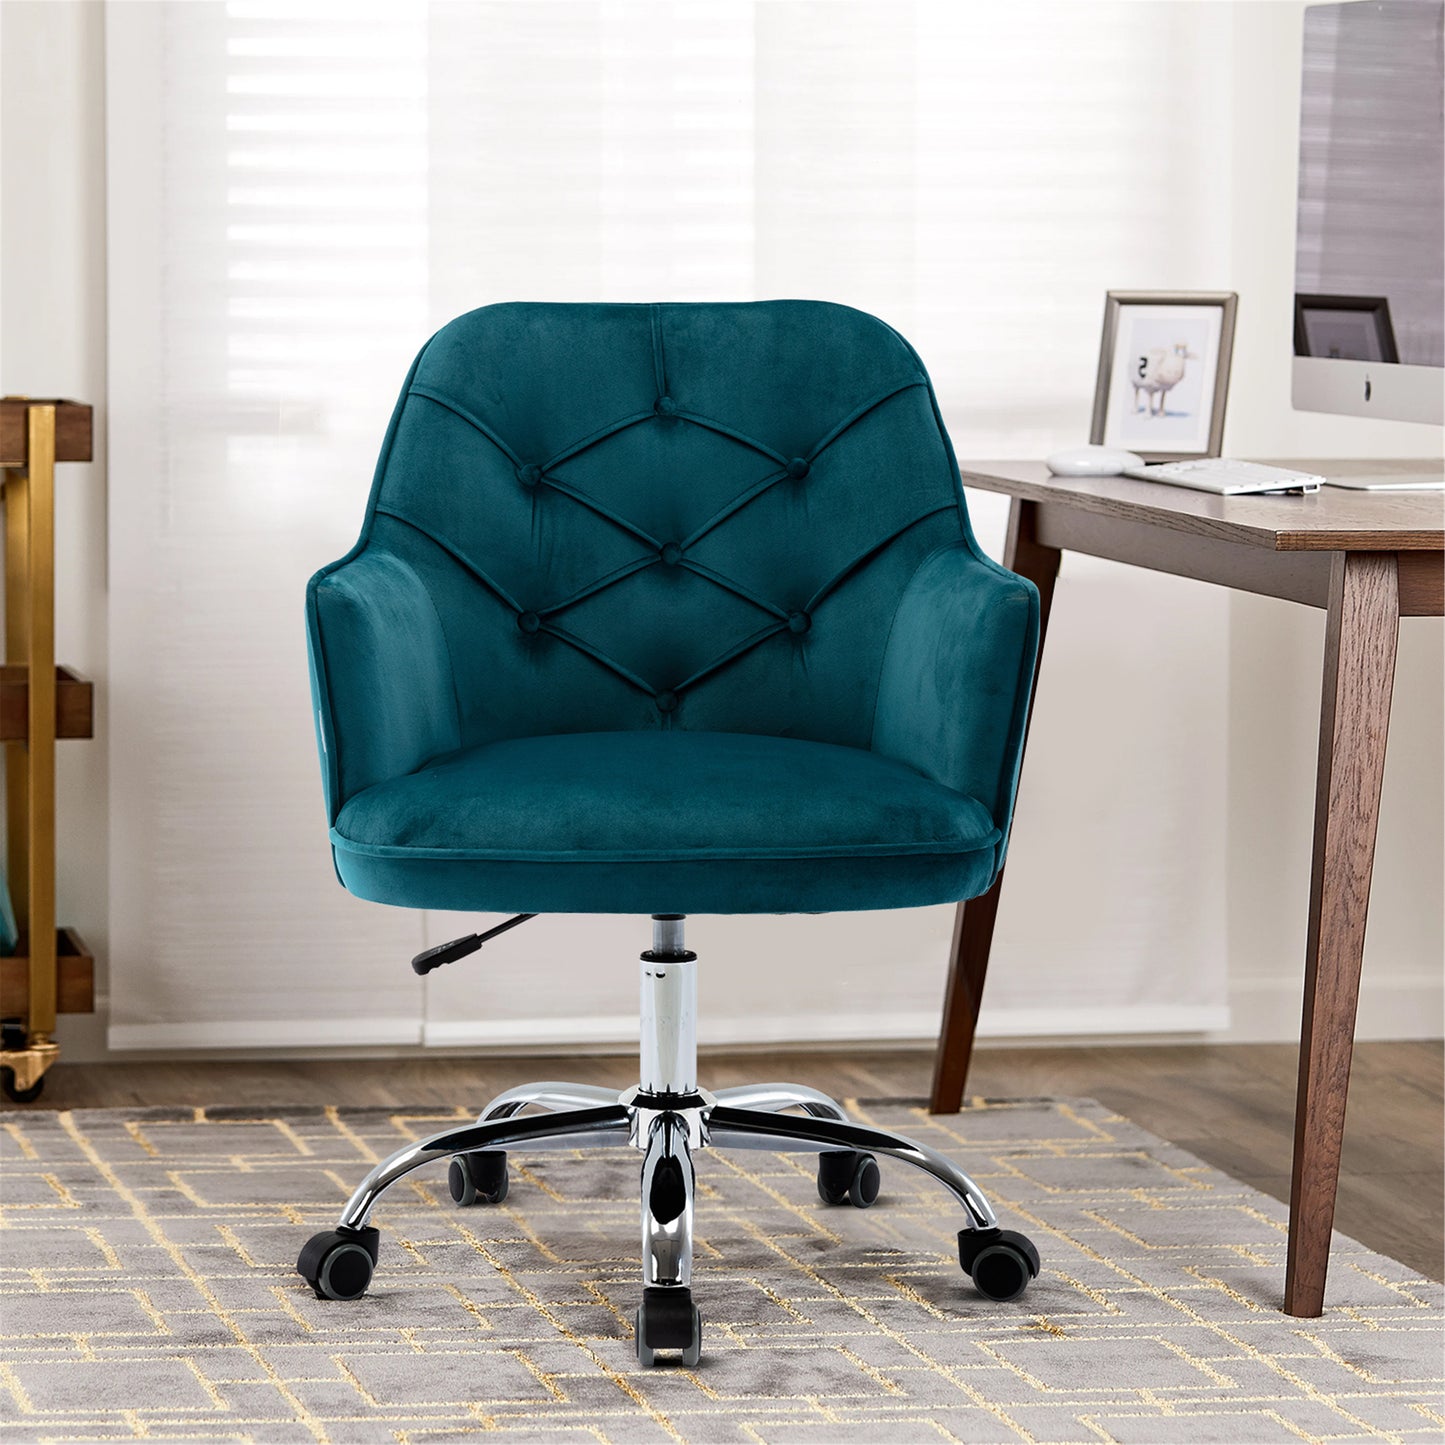 SYNGAR Desk Chairs for Adults, Dark Teal Vanity Stool Chair Velvet with Swivel Wheels and Back for Home, Office Chair Adjustable Height, LJ2286